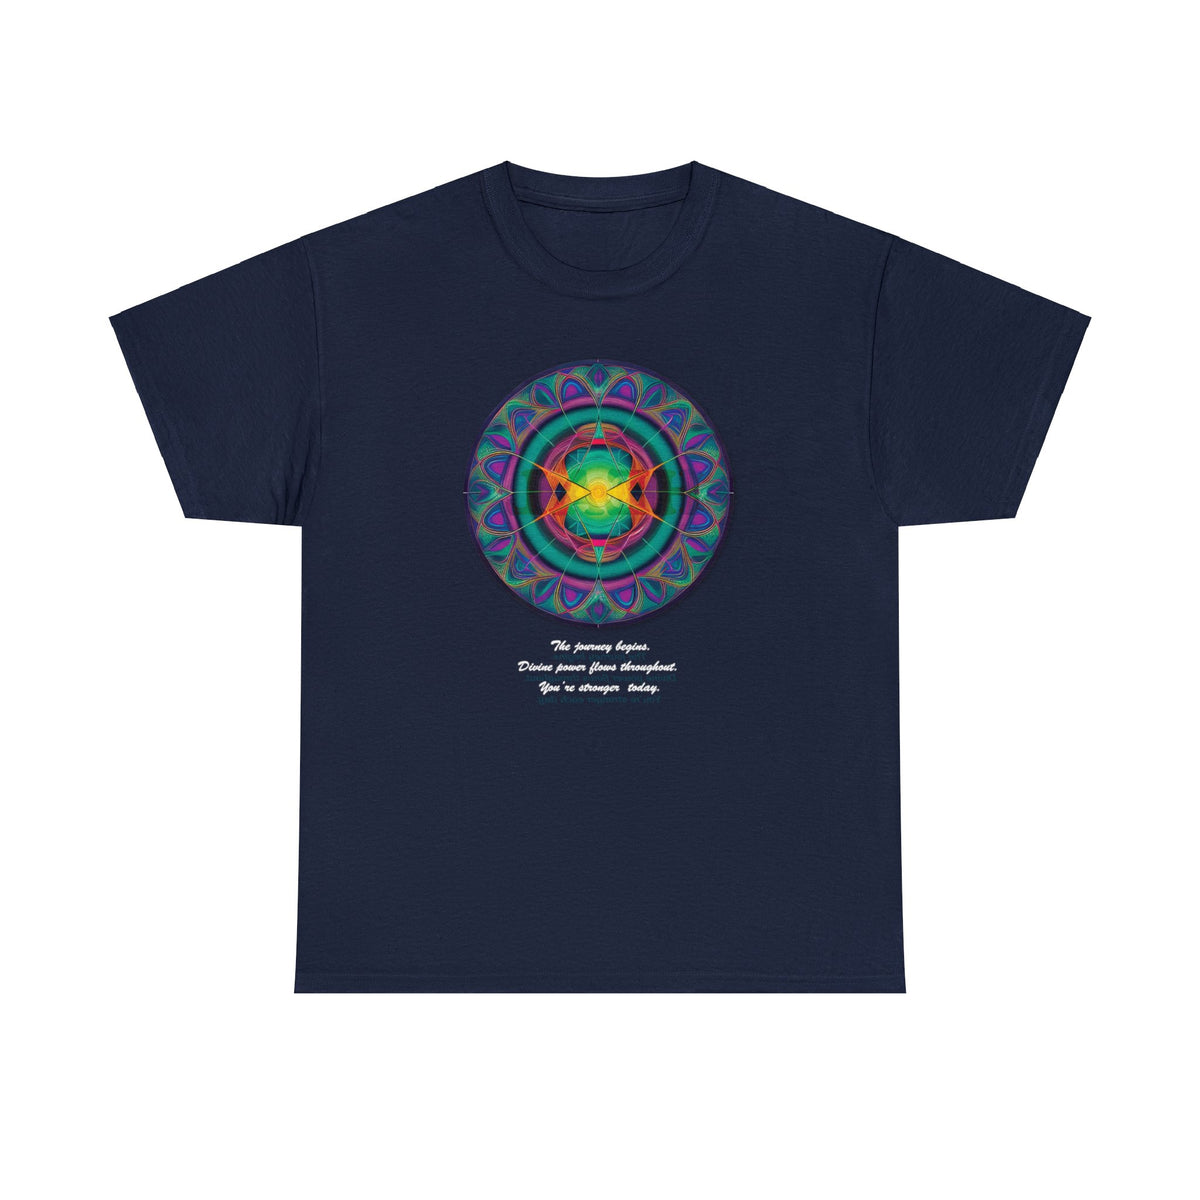 Wellness Shirts - Heal with positivity and mindfulness